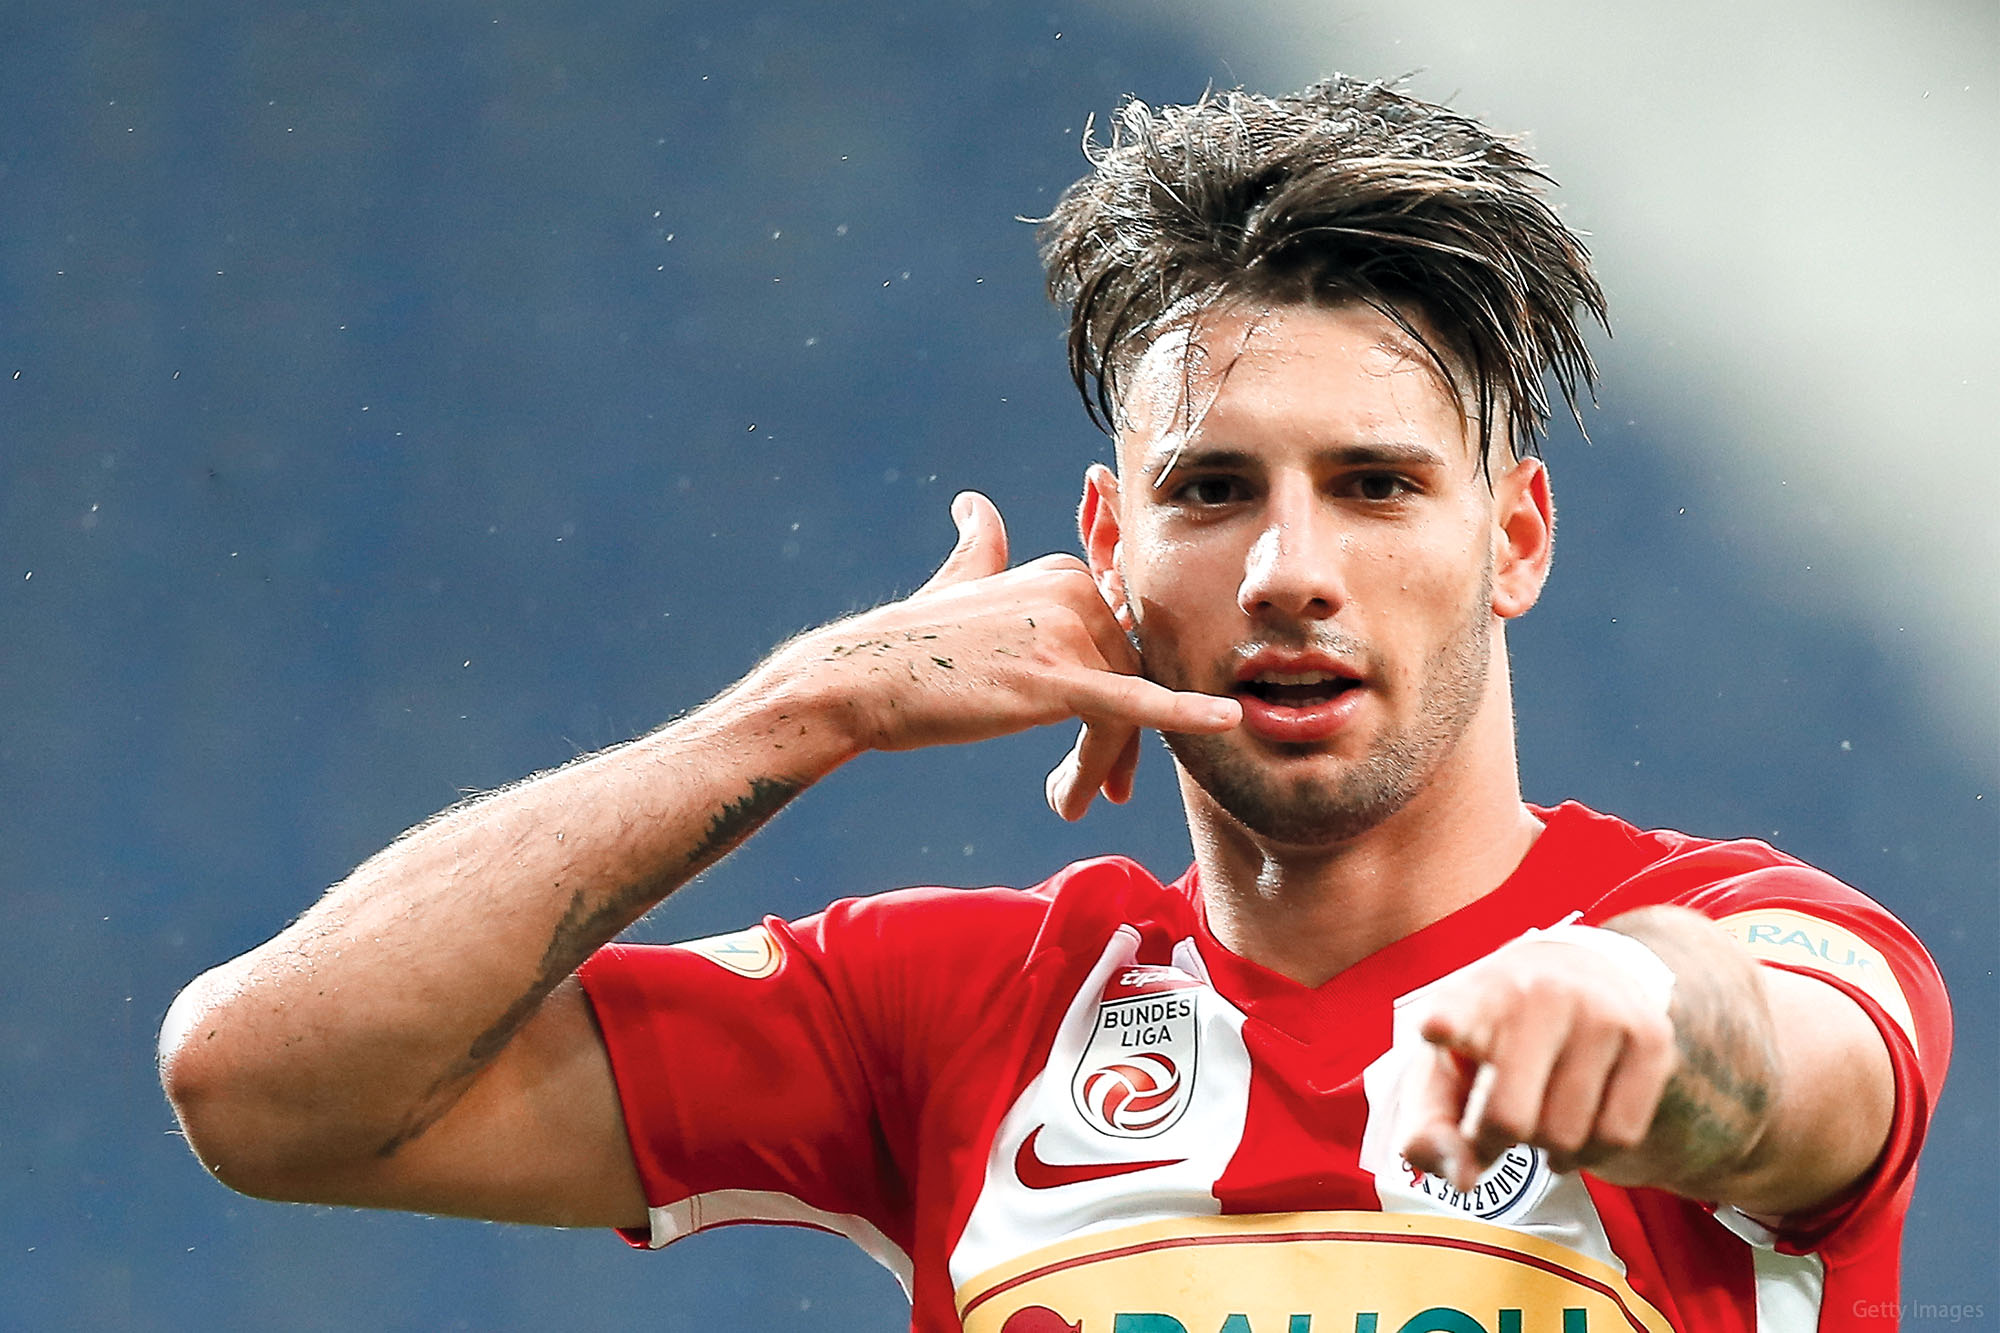 Milan look all-but set to move for long-term target Dominik Szoboszlai, with reports inciting that the Hungarian could finally be about to seal his move